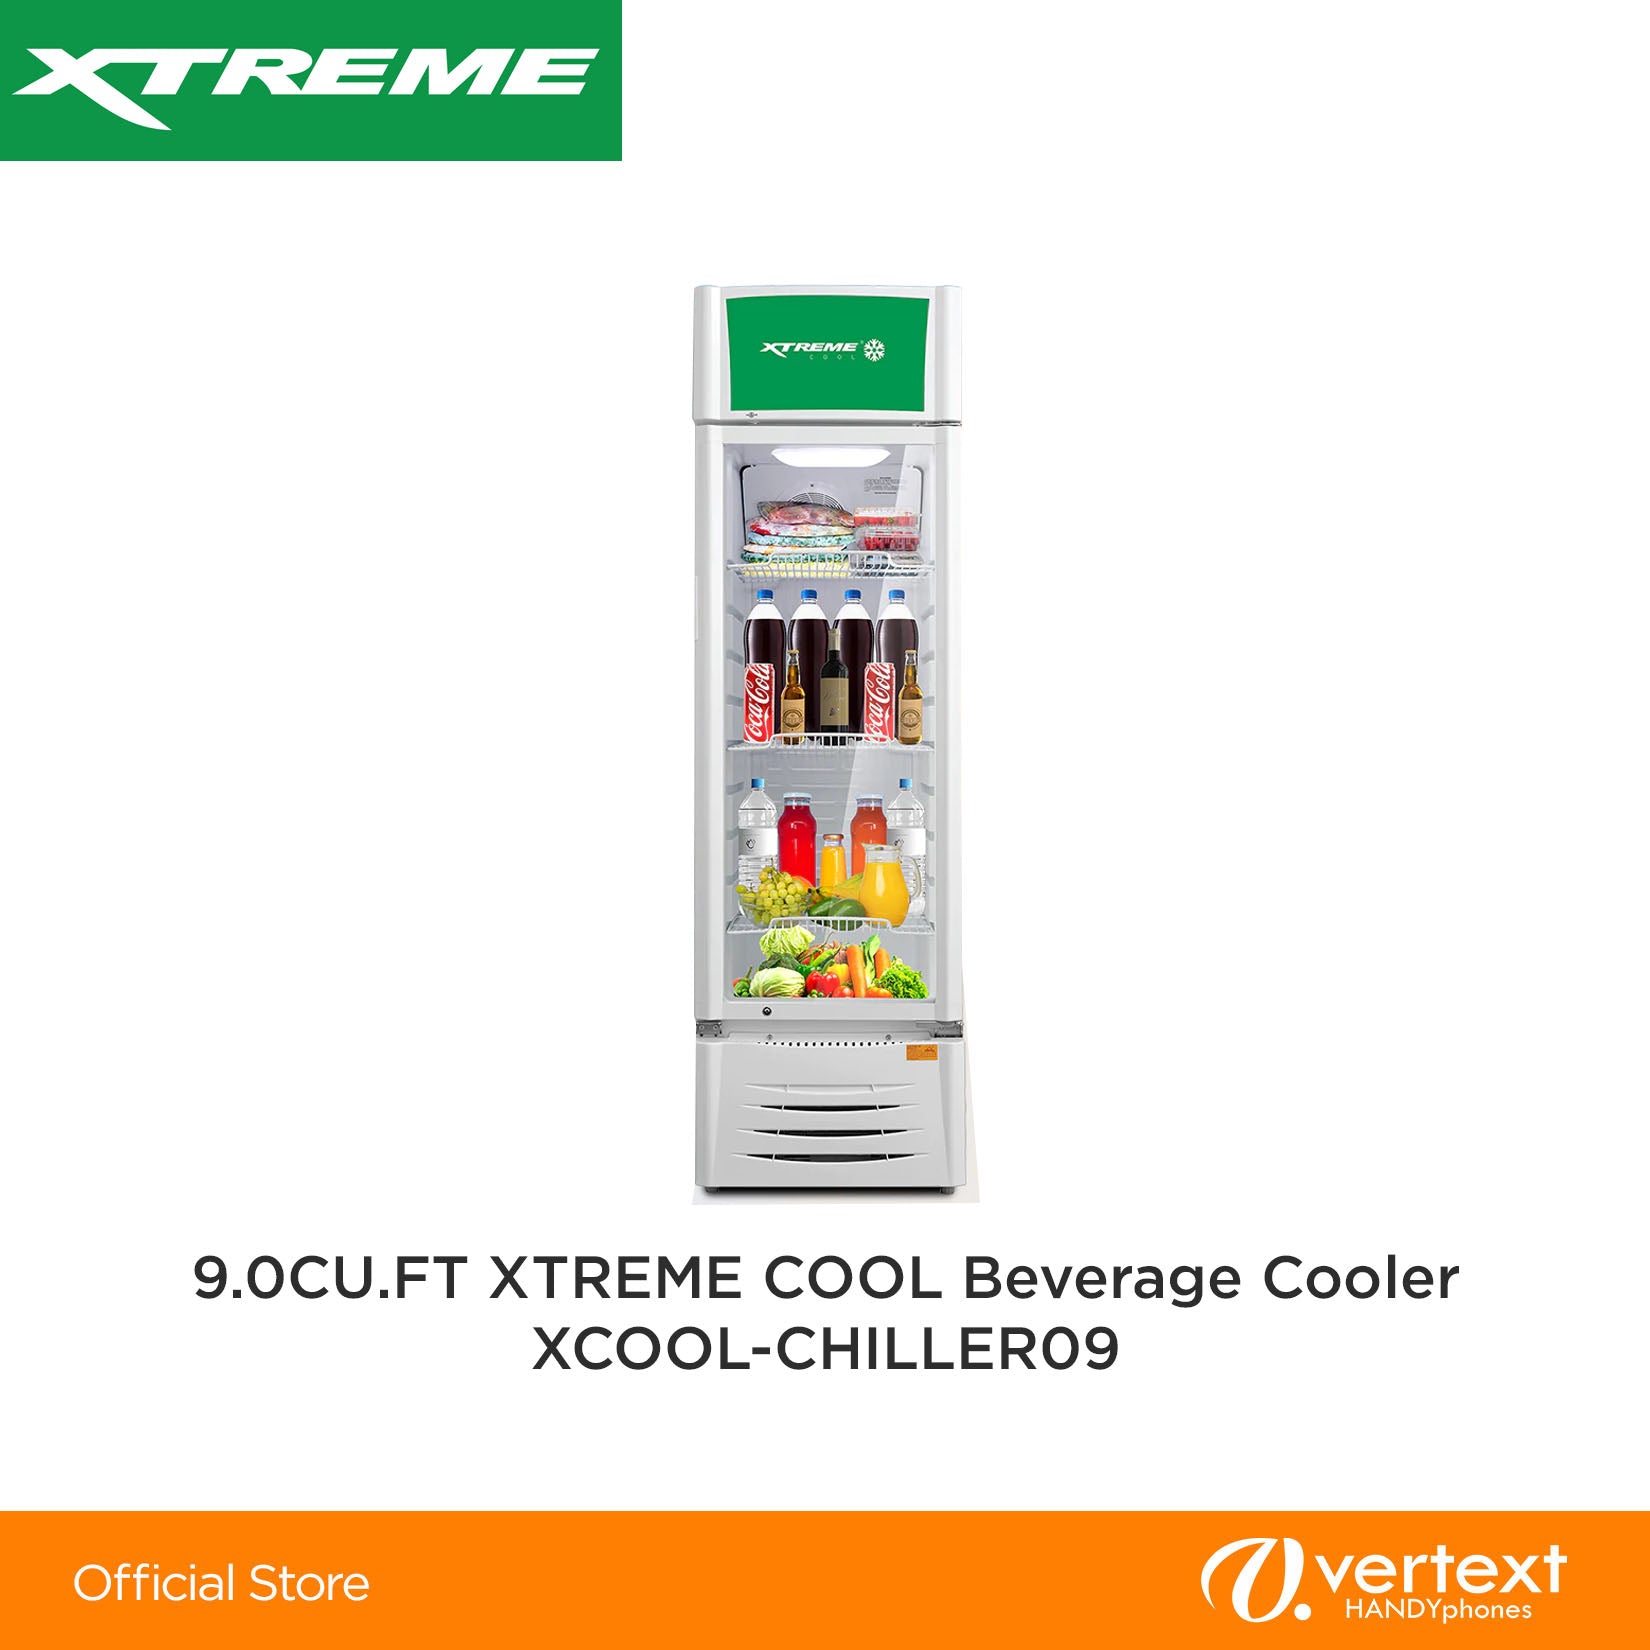 Xtreme XCOOL-CHILLER09